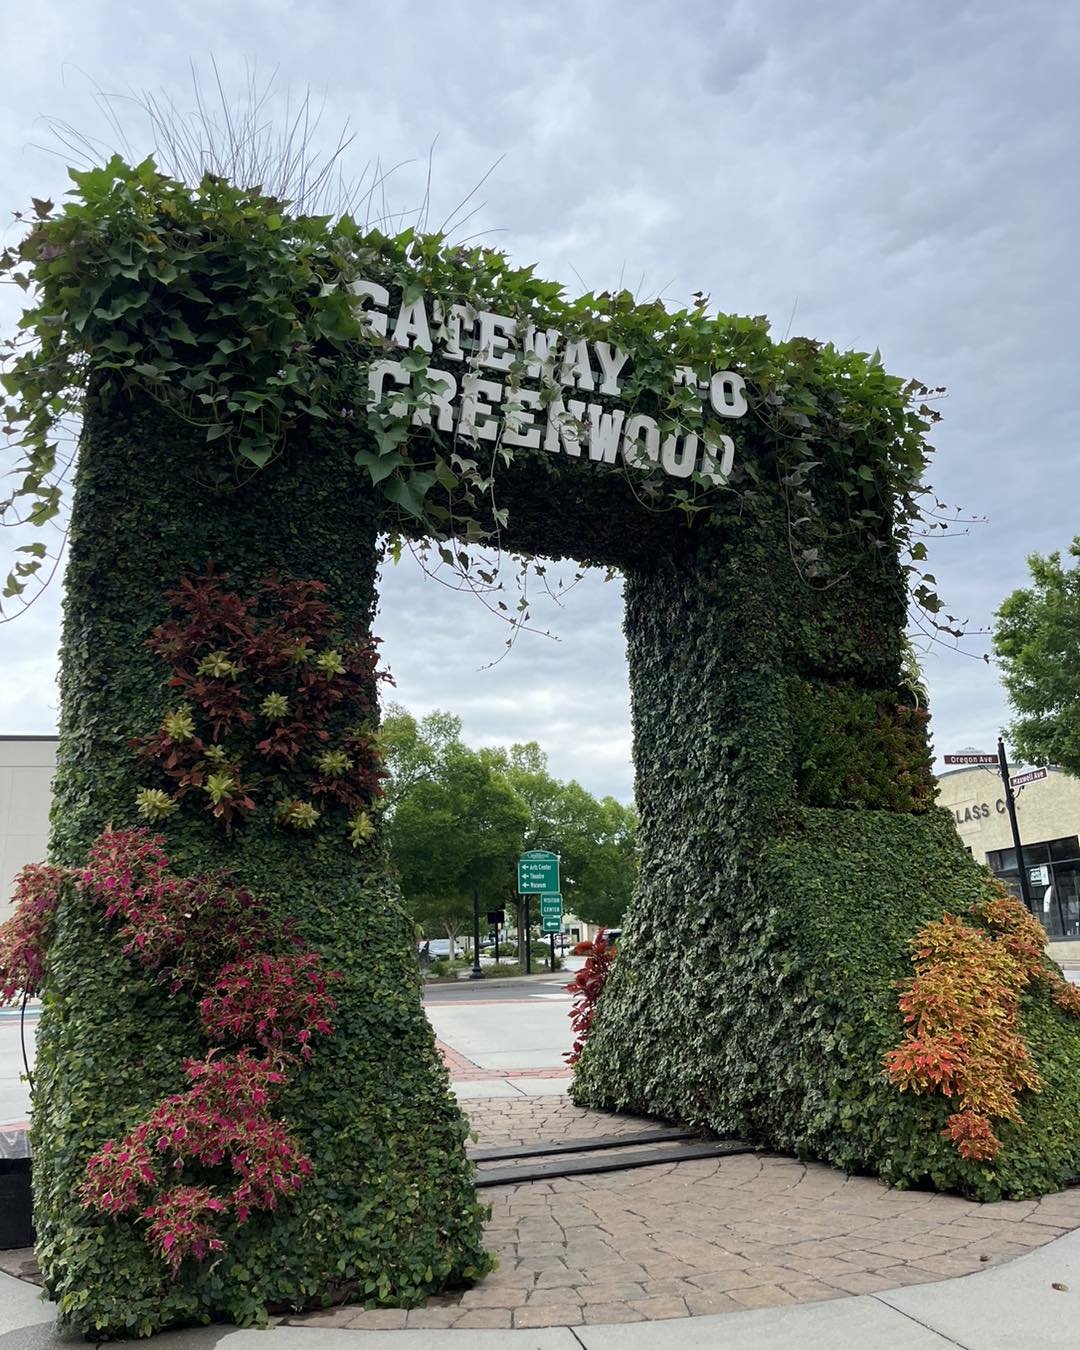 Less than 1 month until we kick off and Greenwood SC Horticulture has started putting out the Topiaries!😱😍🥳 

Keep an eye on Uptown Greenwood the next two weeks, you may get to see the team put out these beautiful works of living art. This one was